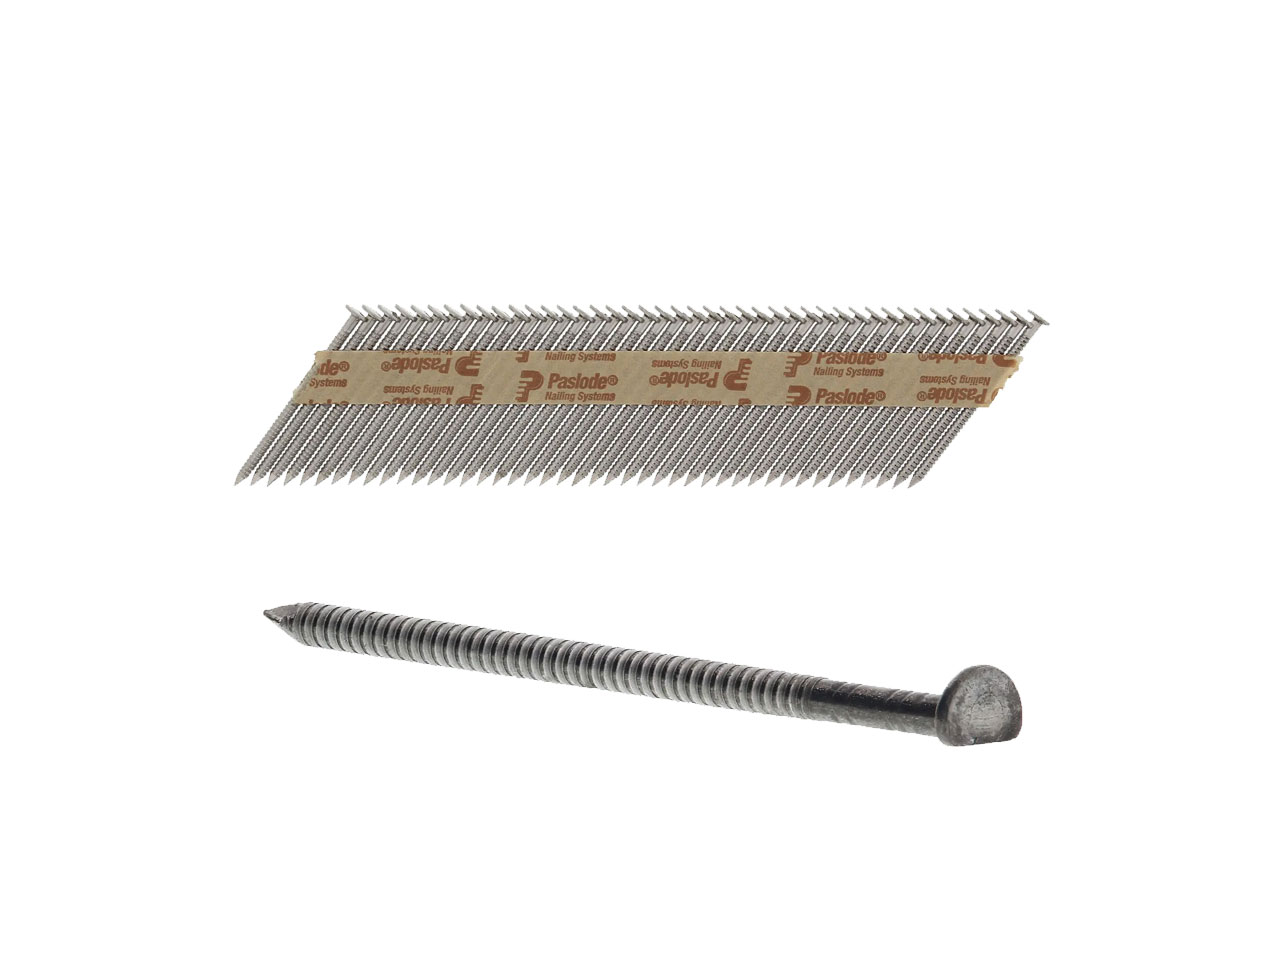 TIMCO Paslode 3.1 x 90mm - Ring Nails Galv-Plus Finish Box of 2,200 + 2  Fuel Cells : Amazon.co.uk: DIY & Tools